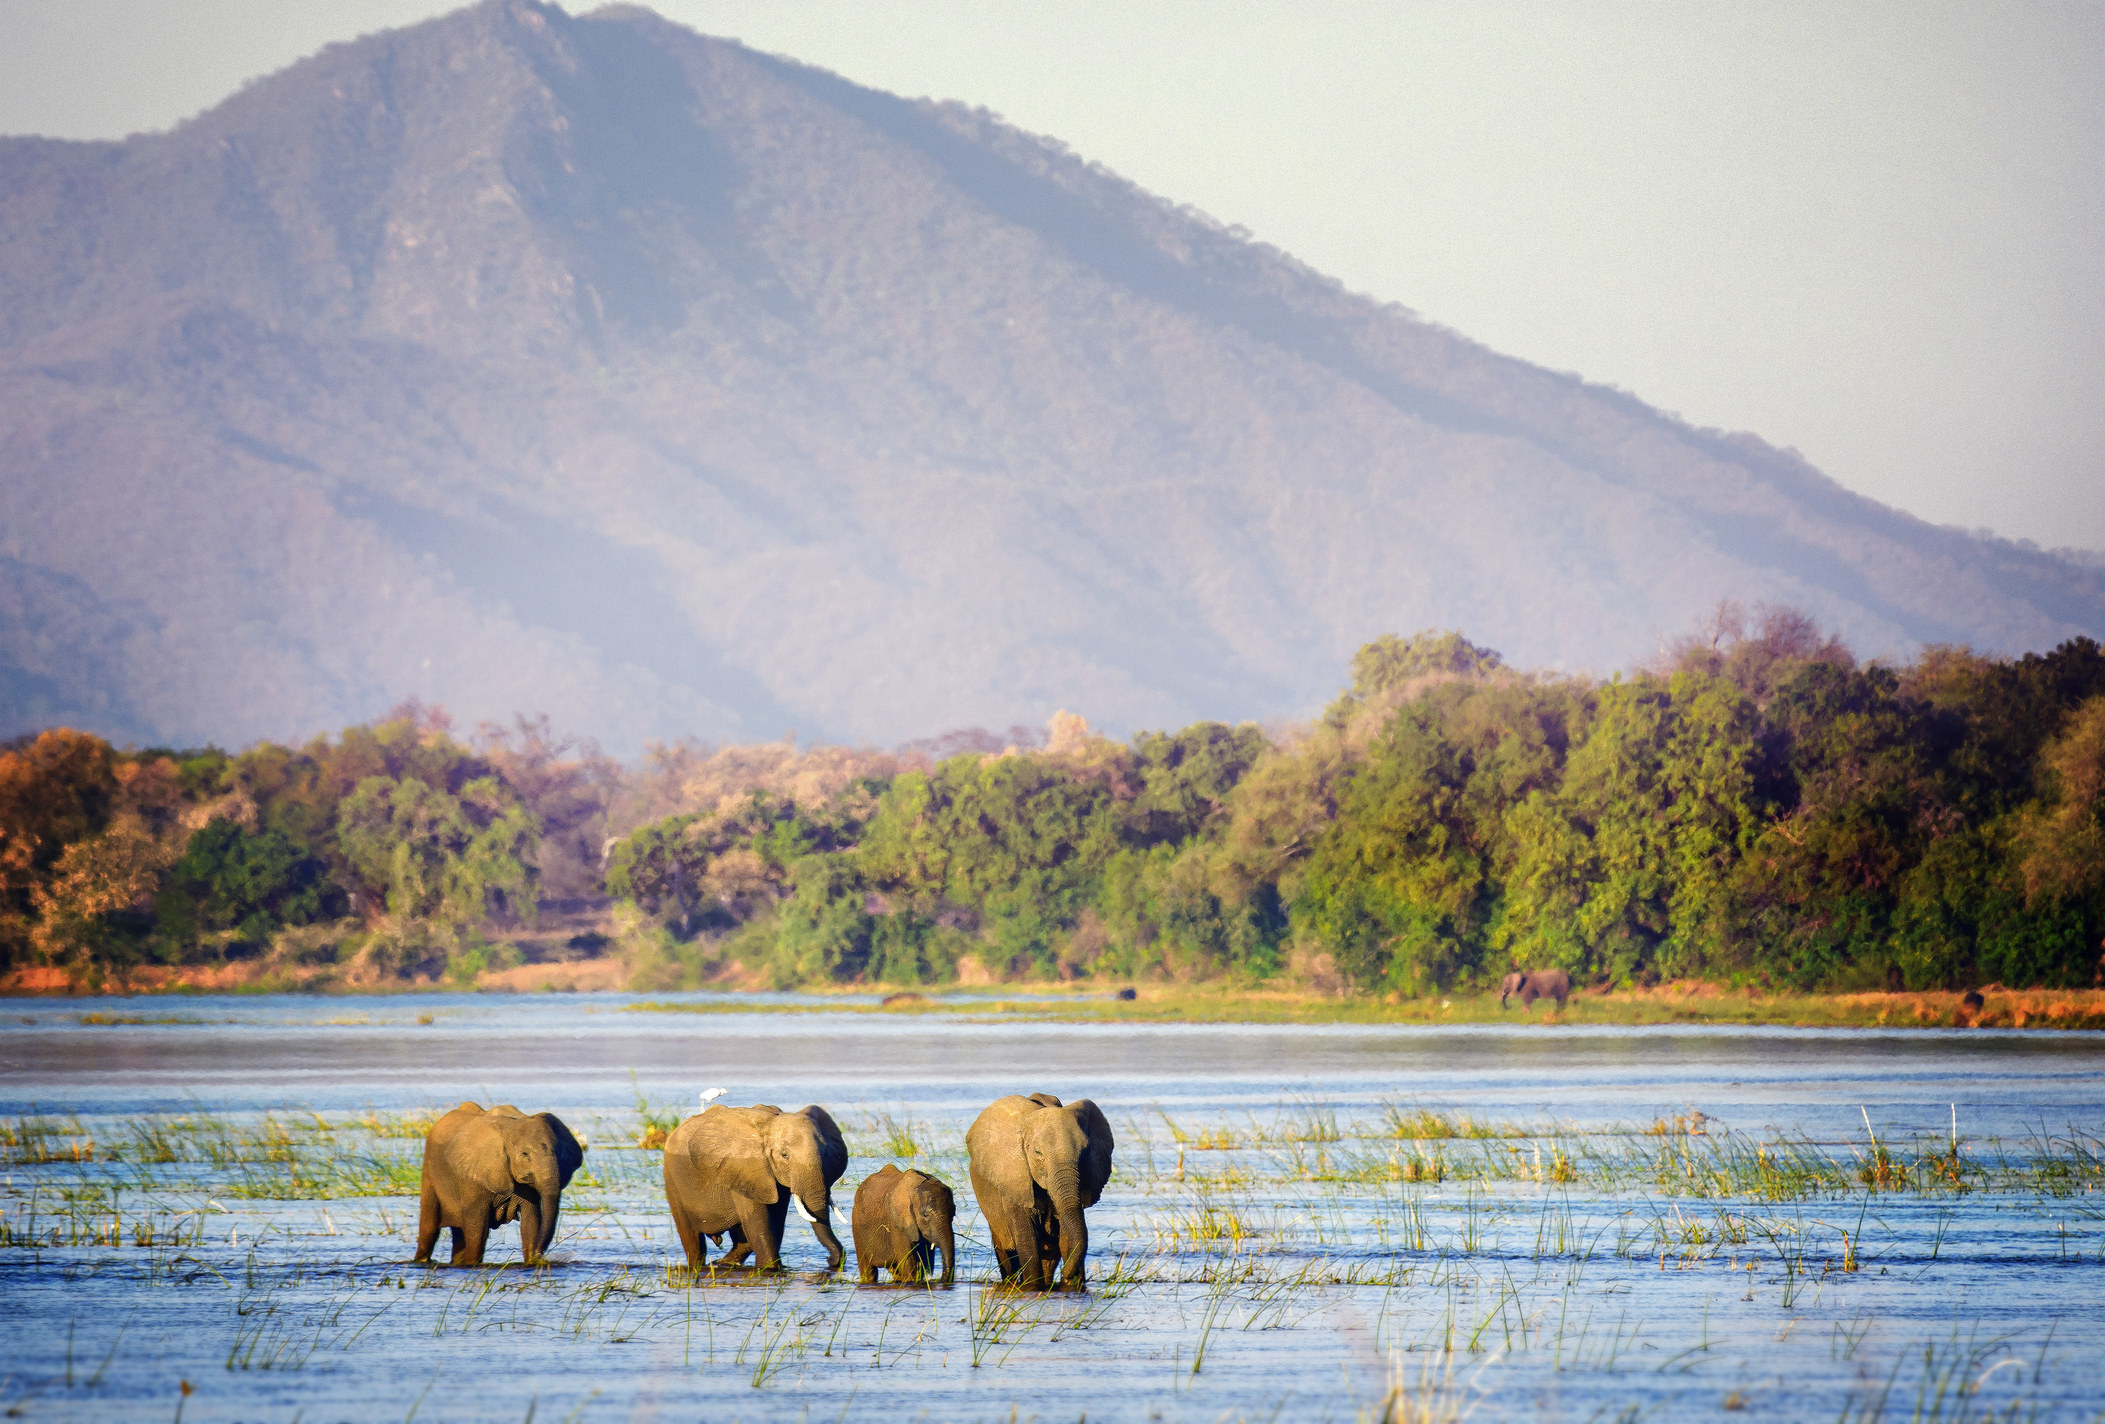 A small Elephant family wading through the water of the Zambezi River.